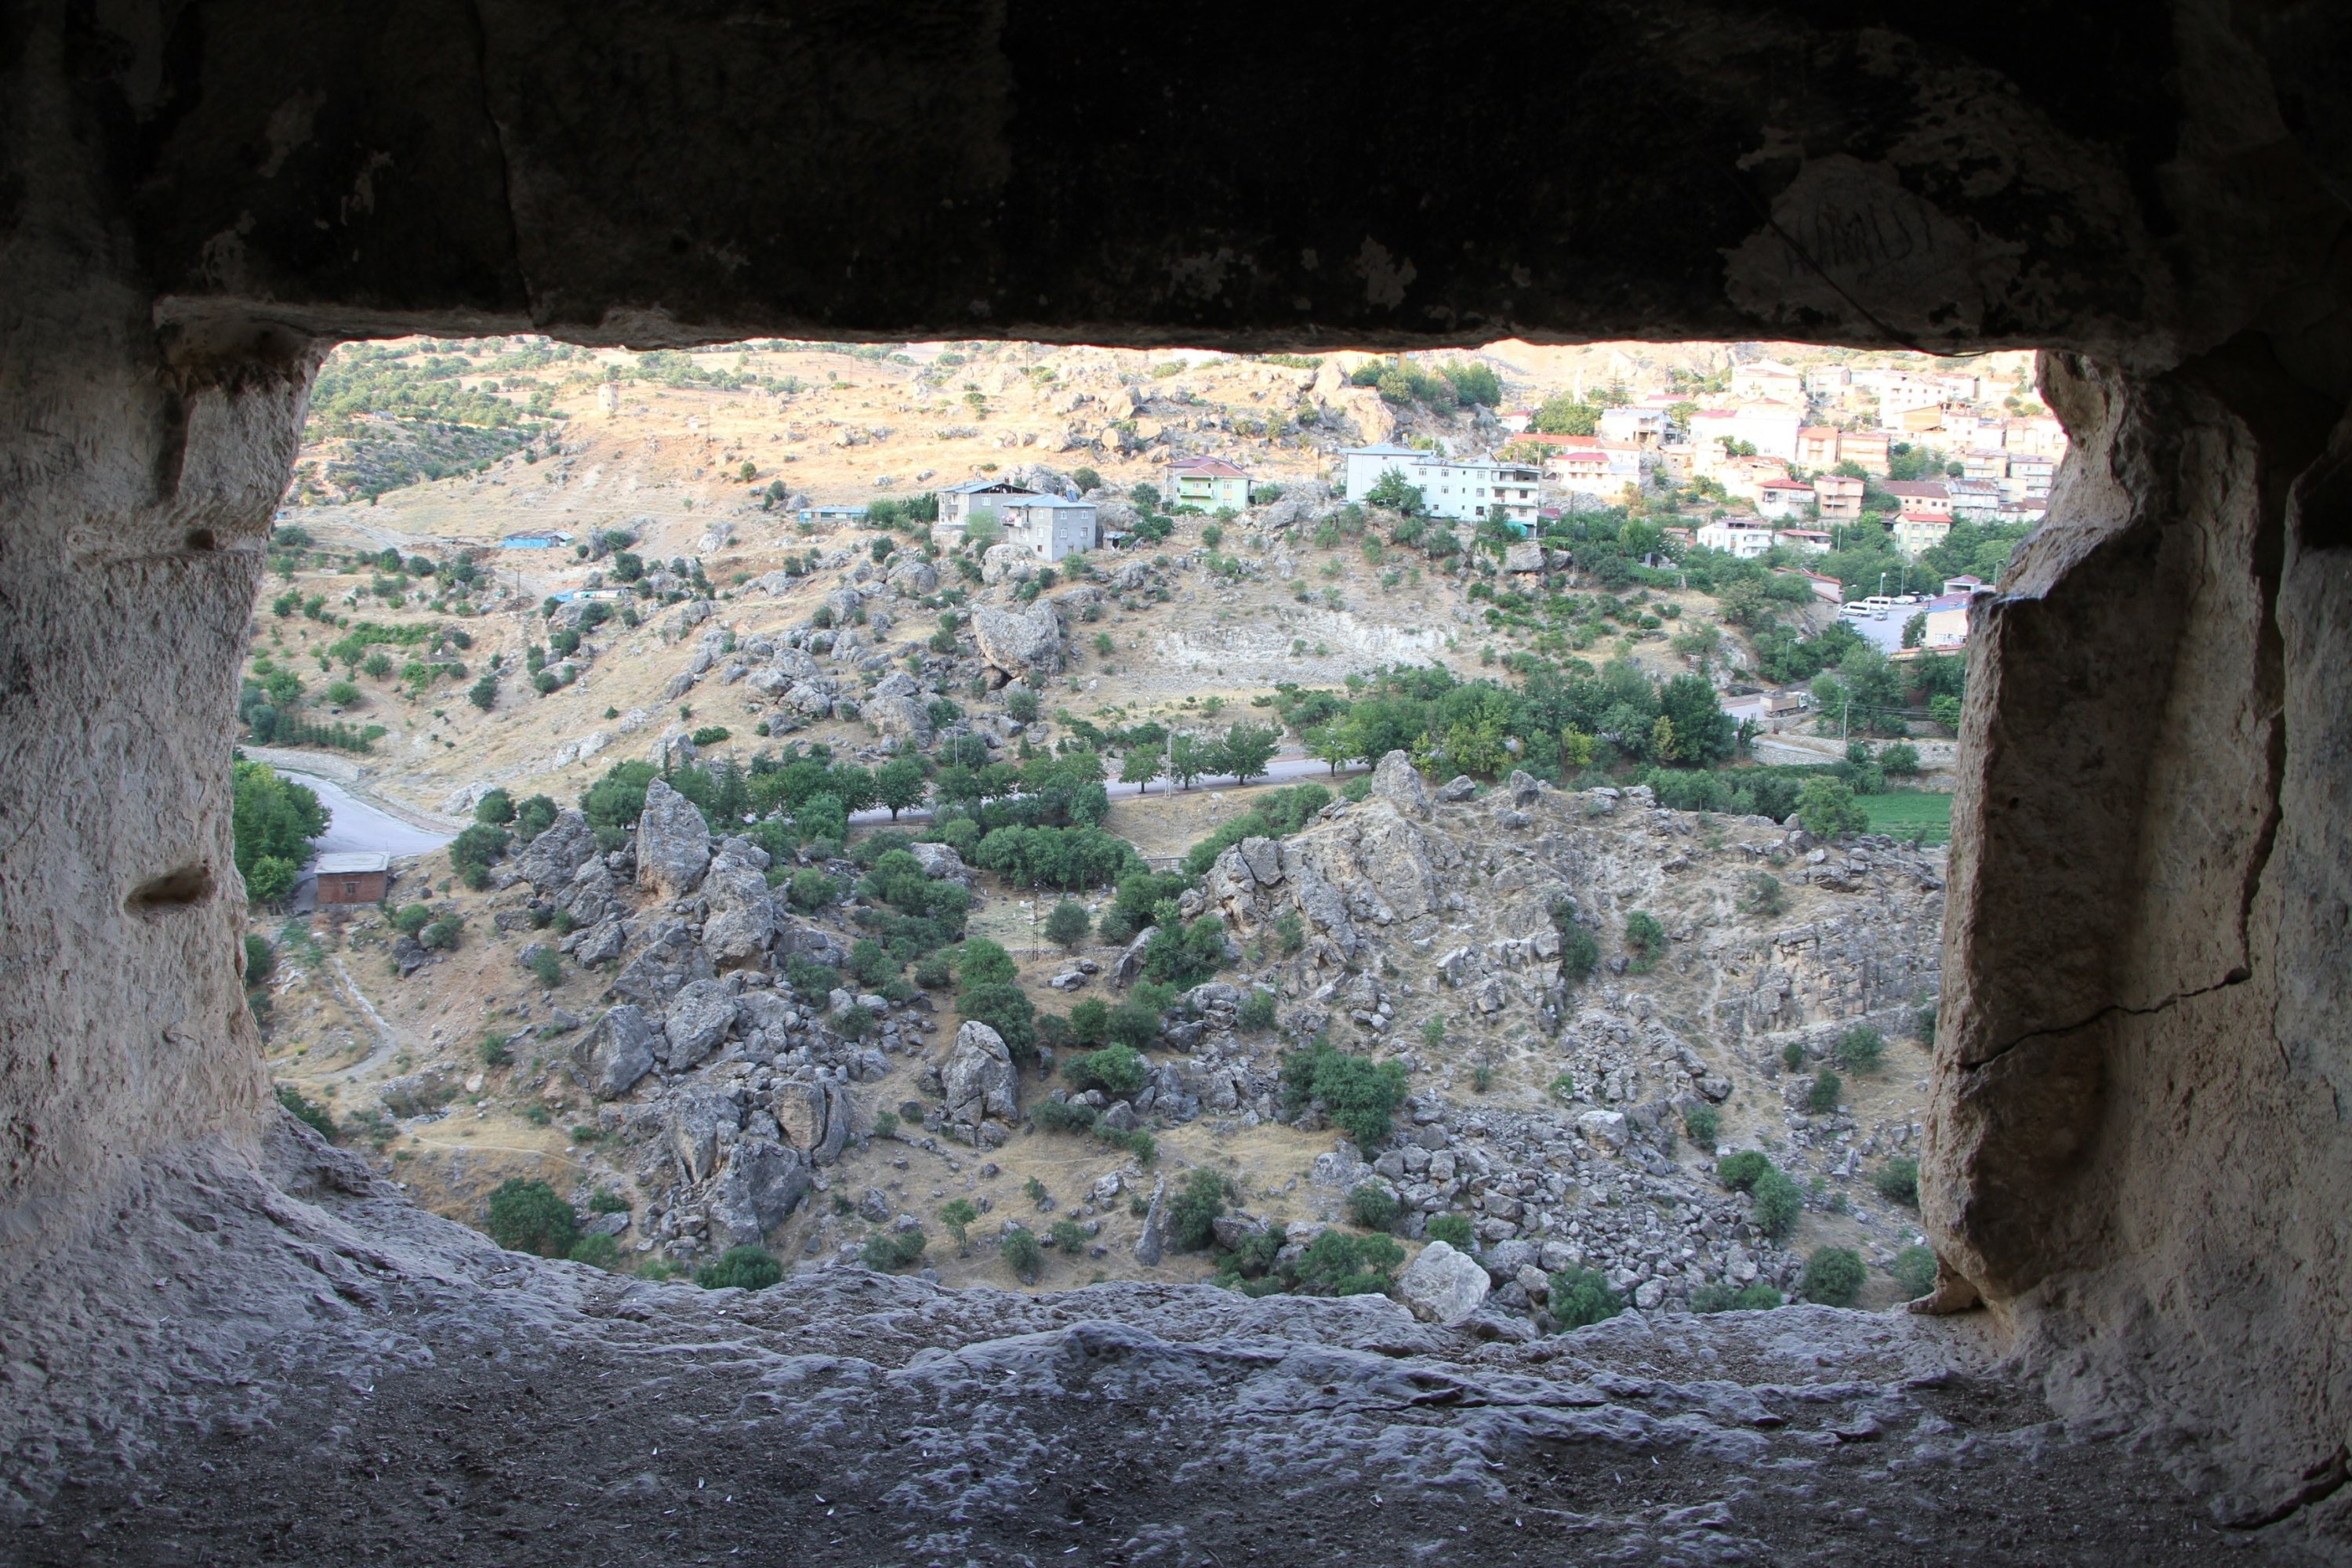 The scenic view from a cave room in Tunceli, eastern Turkey, Aug. 8, 2021. (İHA Photo)